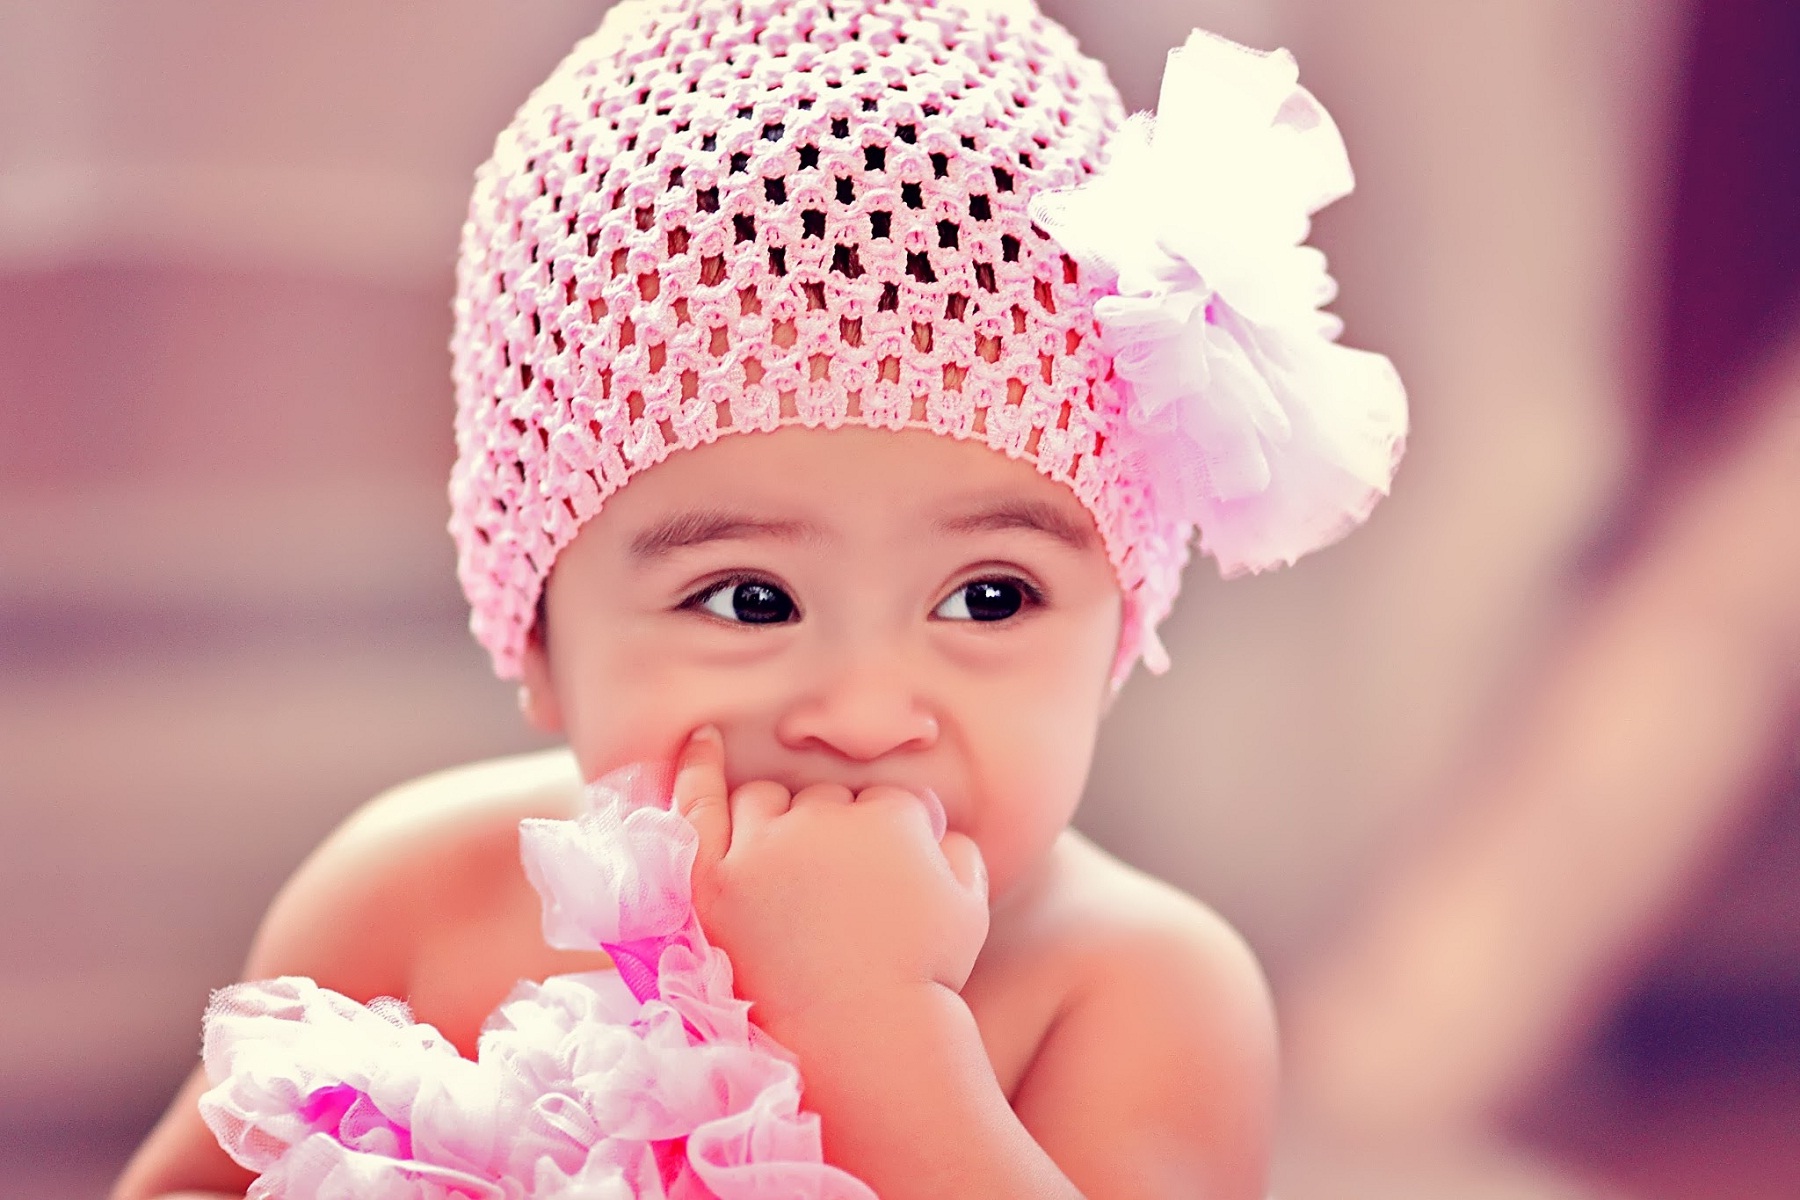 Chary cute baby pink net hat